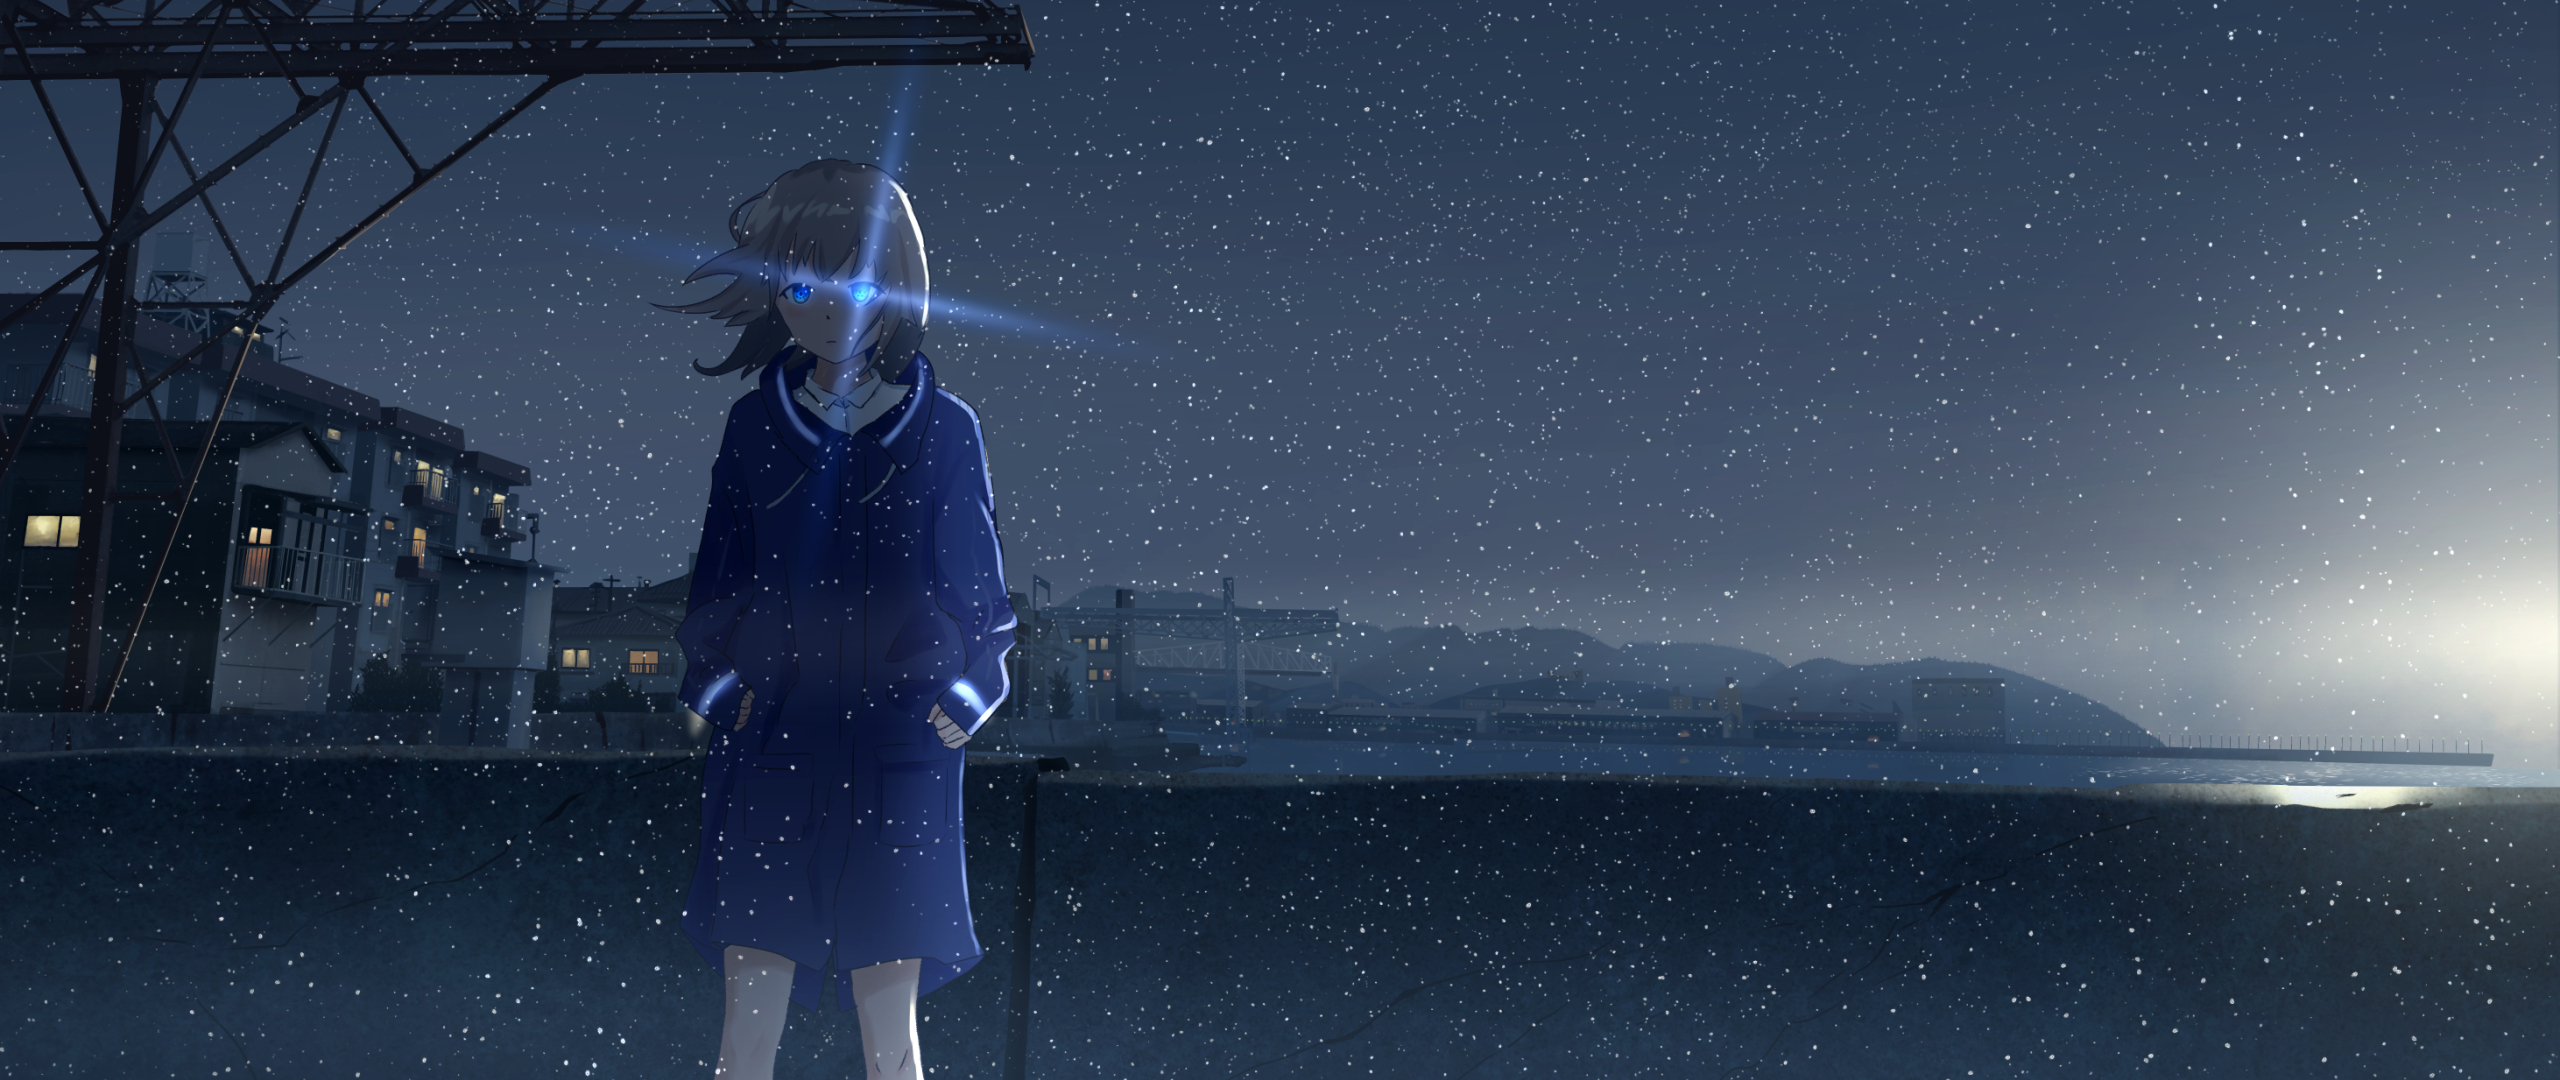 2560X1080 Resolution Anime Girl At Starry Night 2560X1080 Resolution